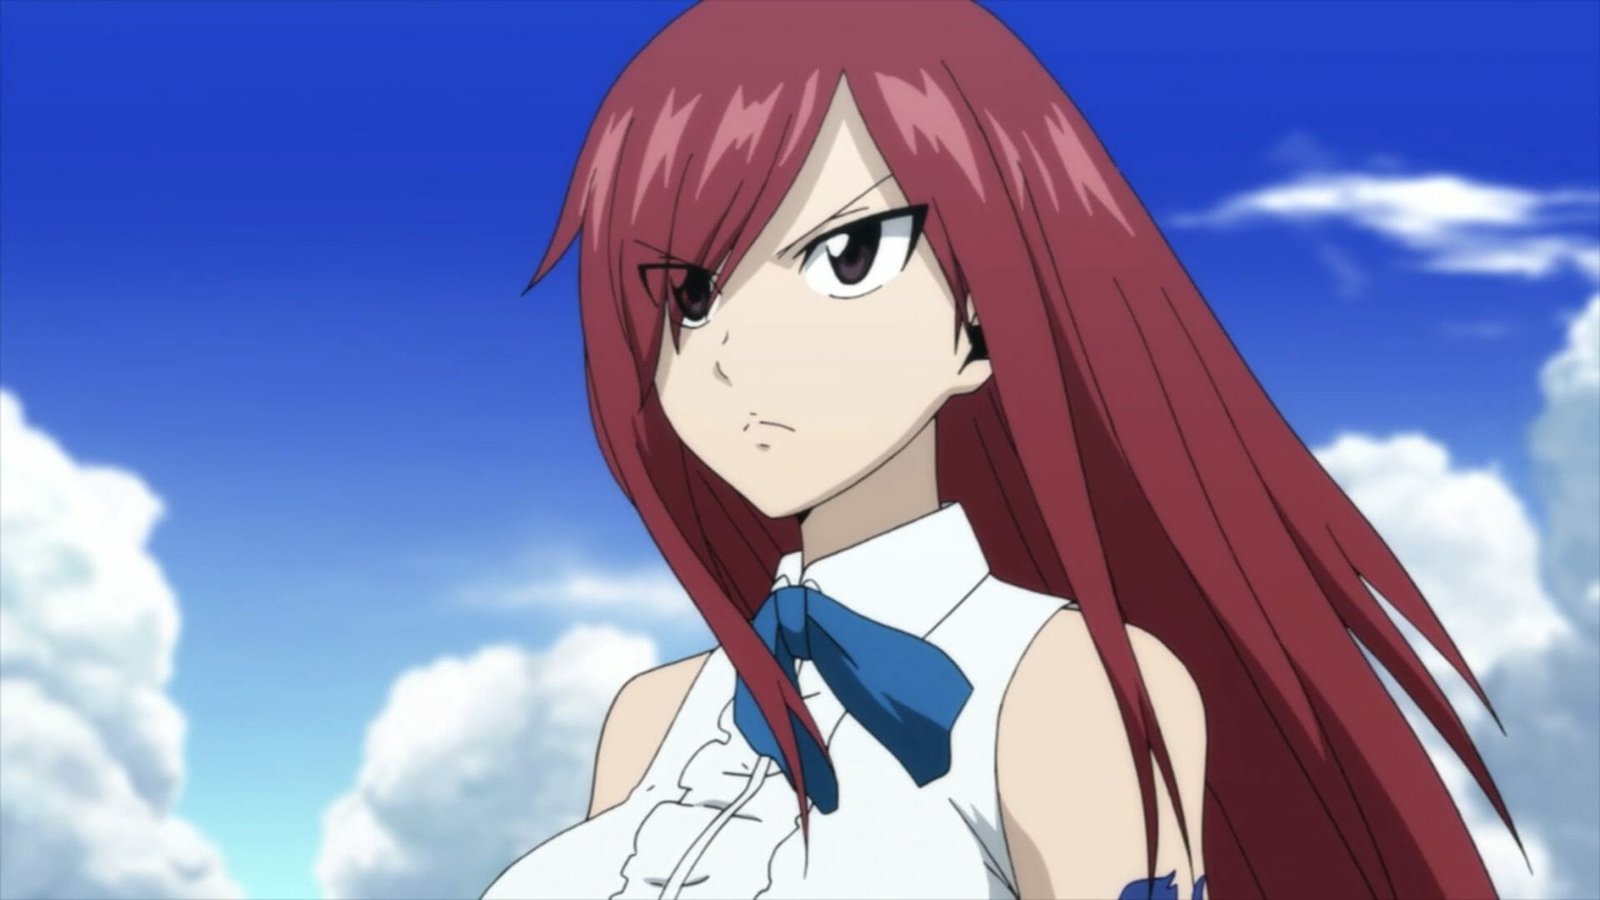 Anime Quote by Erza Scarlet